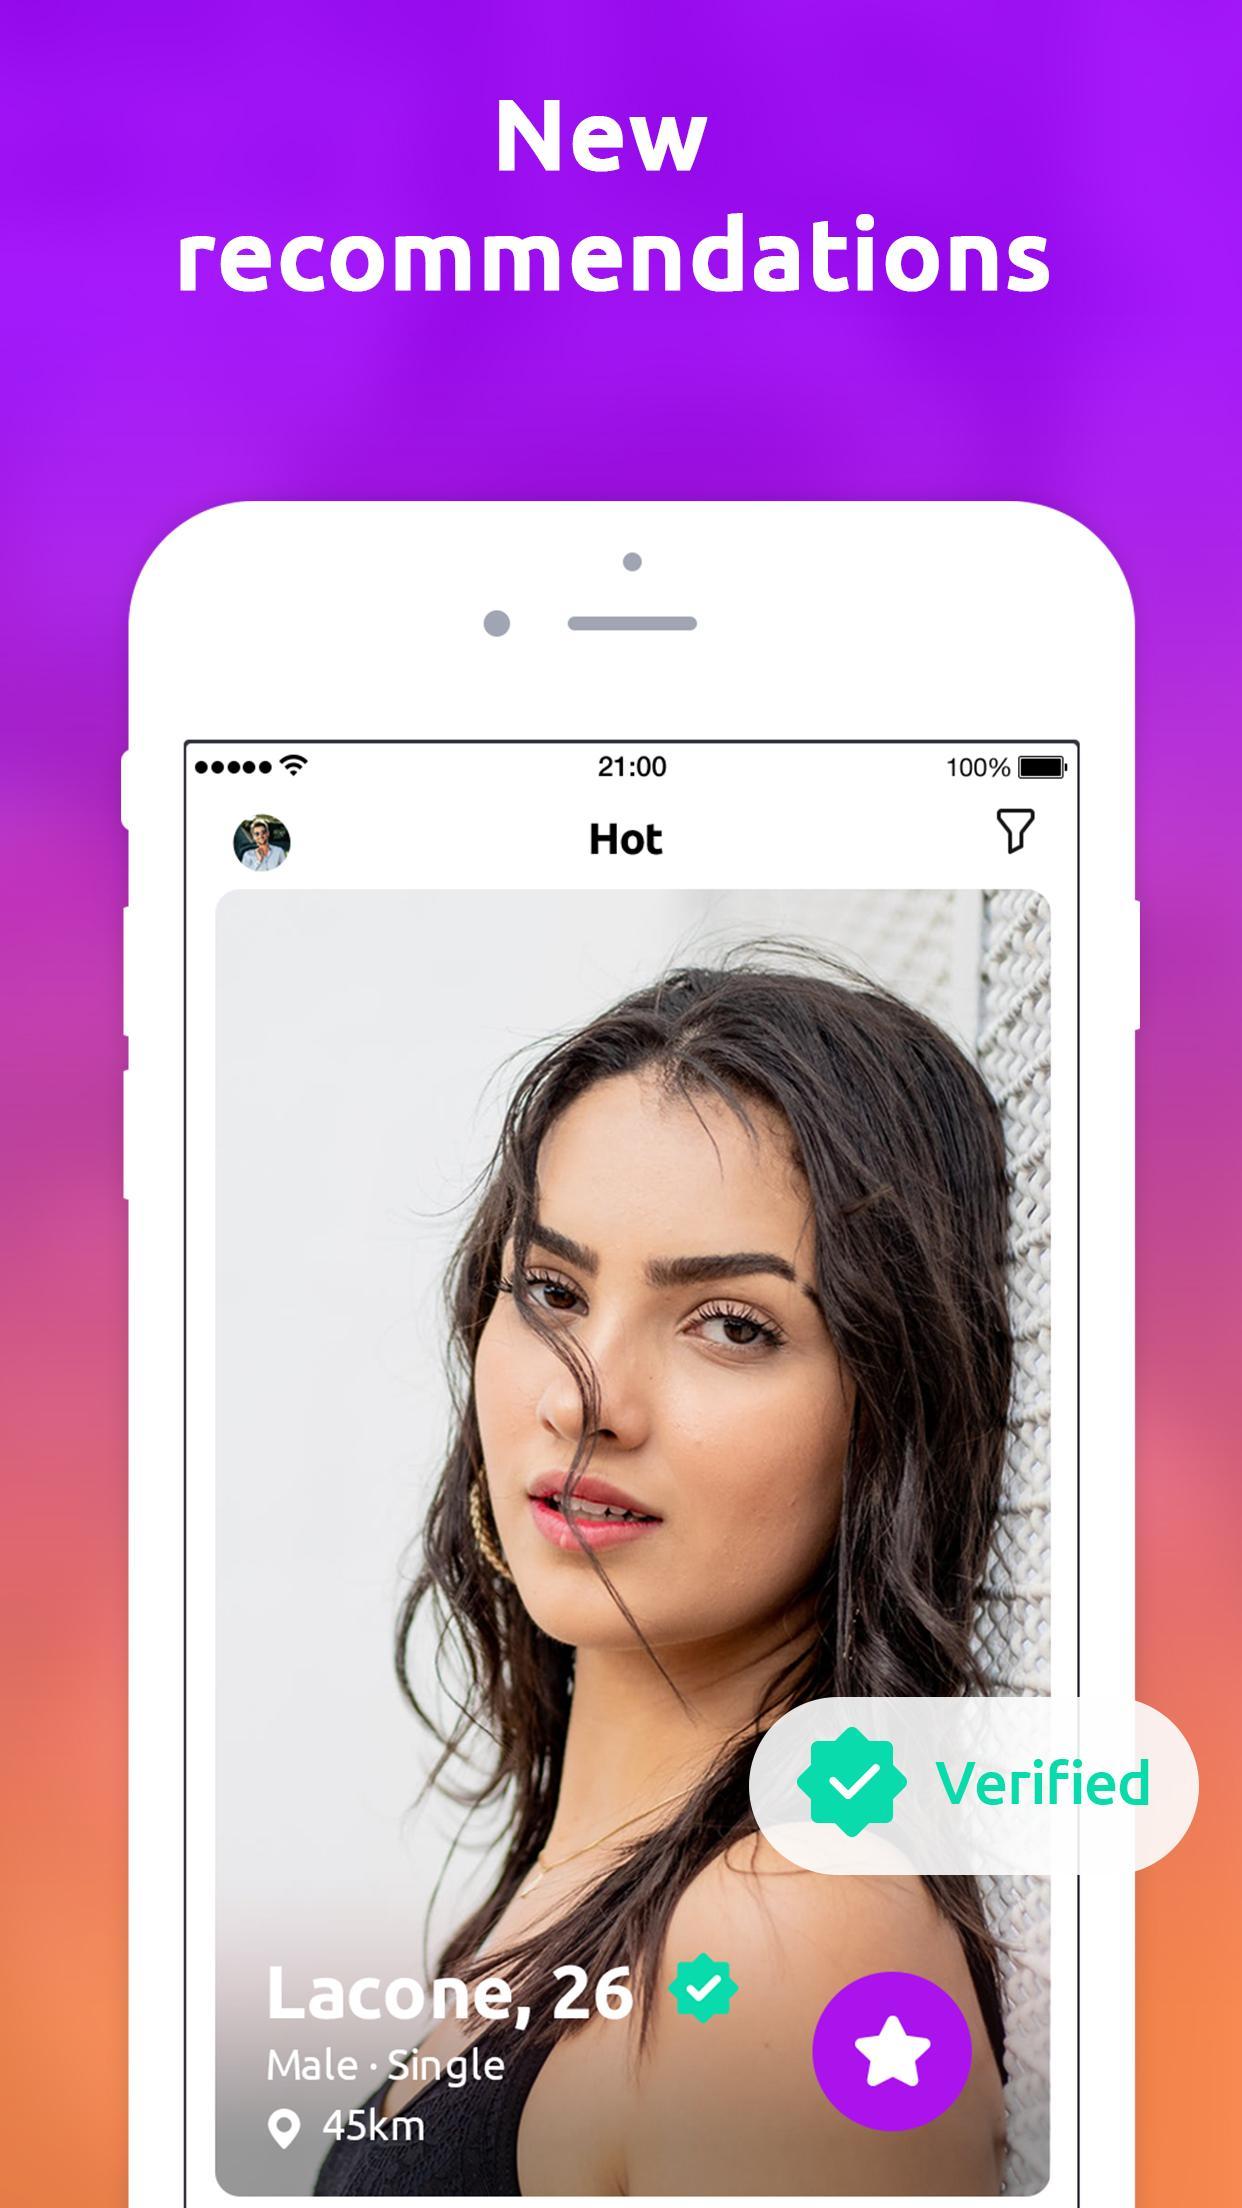 Looking for An FWB App? – 5 Best FWB Dating Apps to Use Today